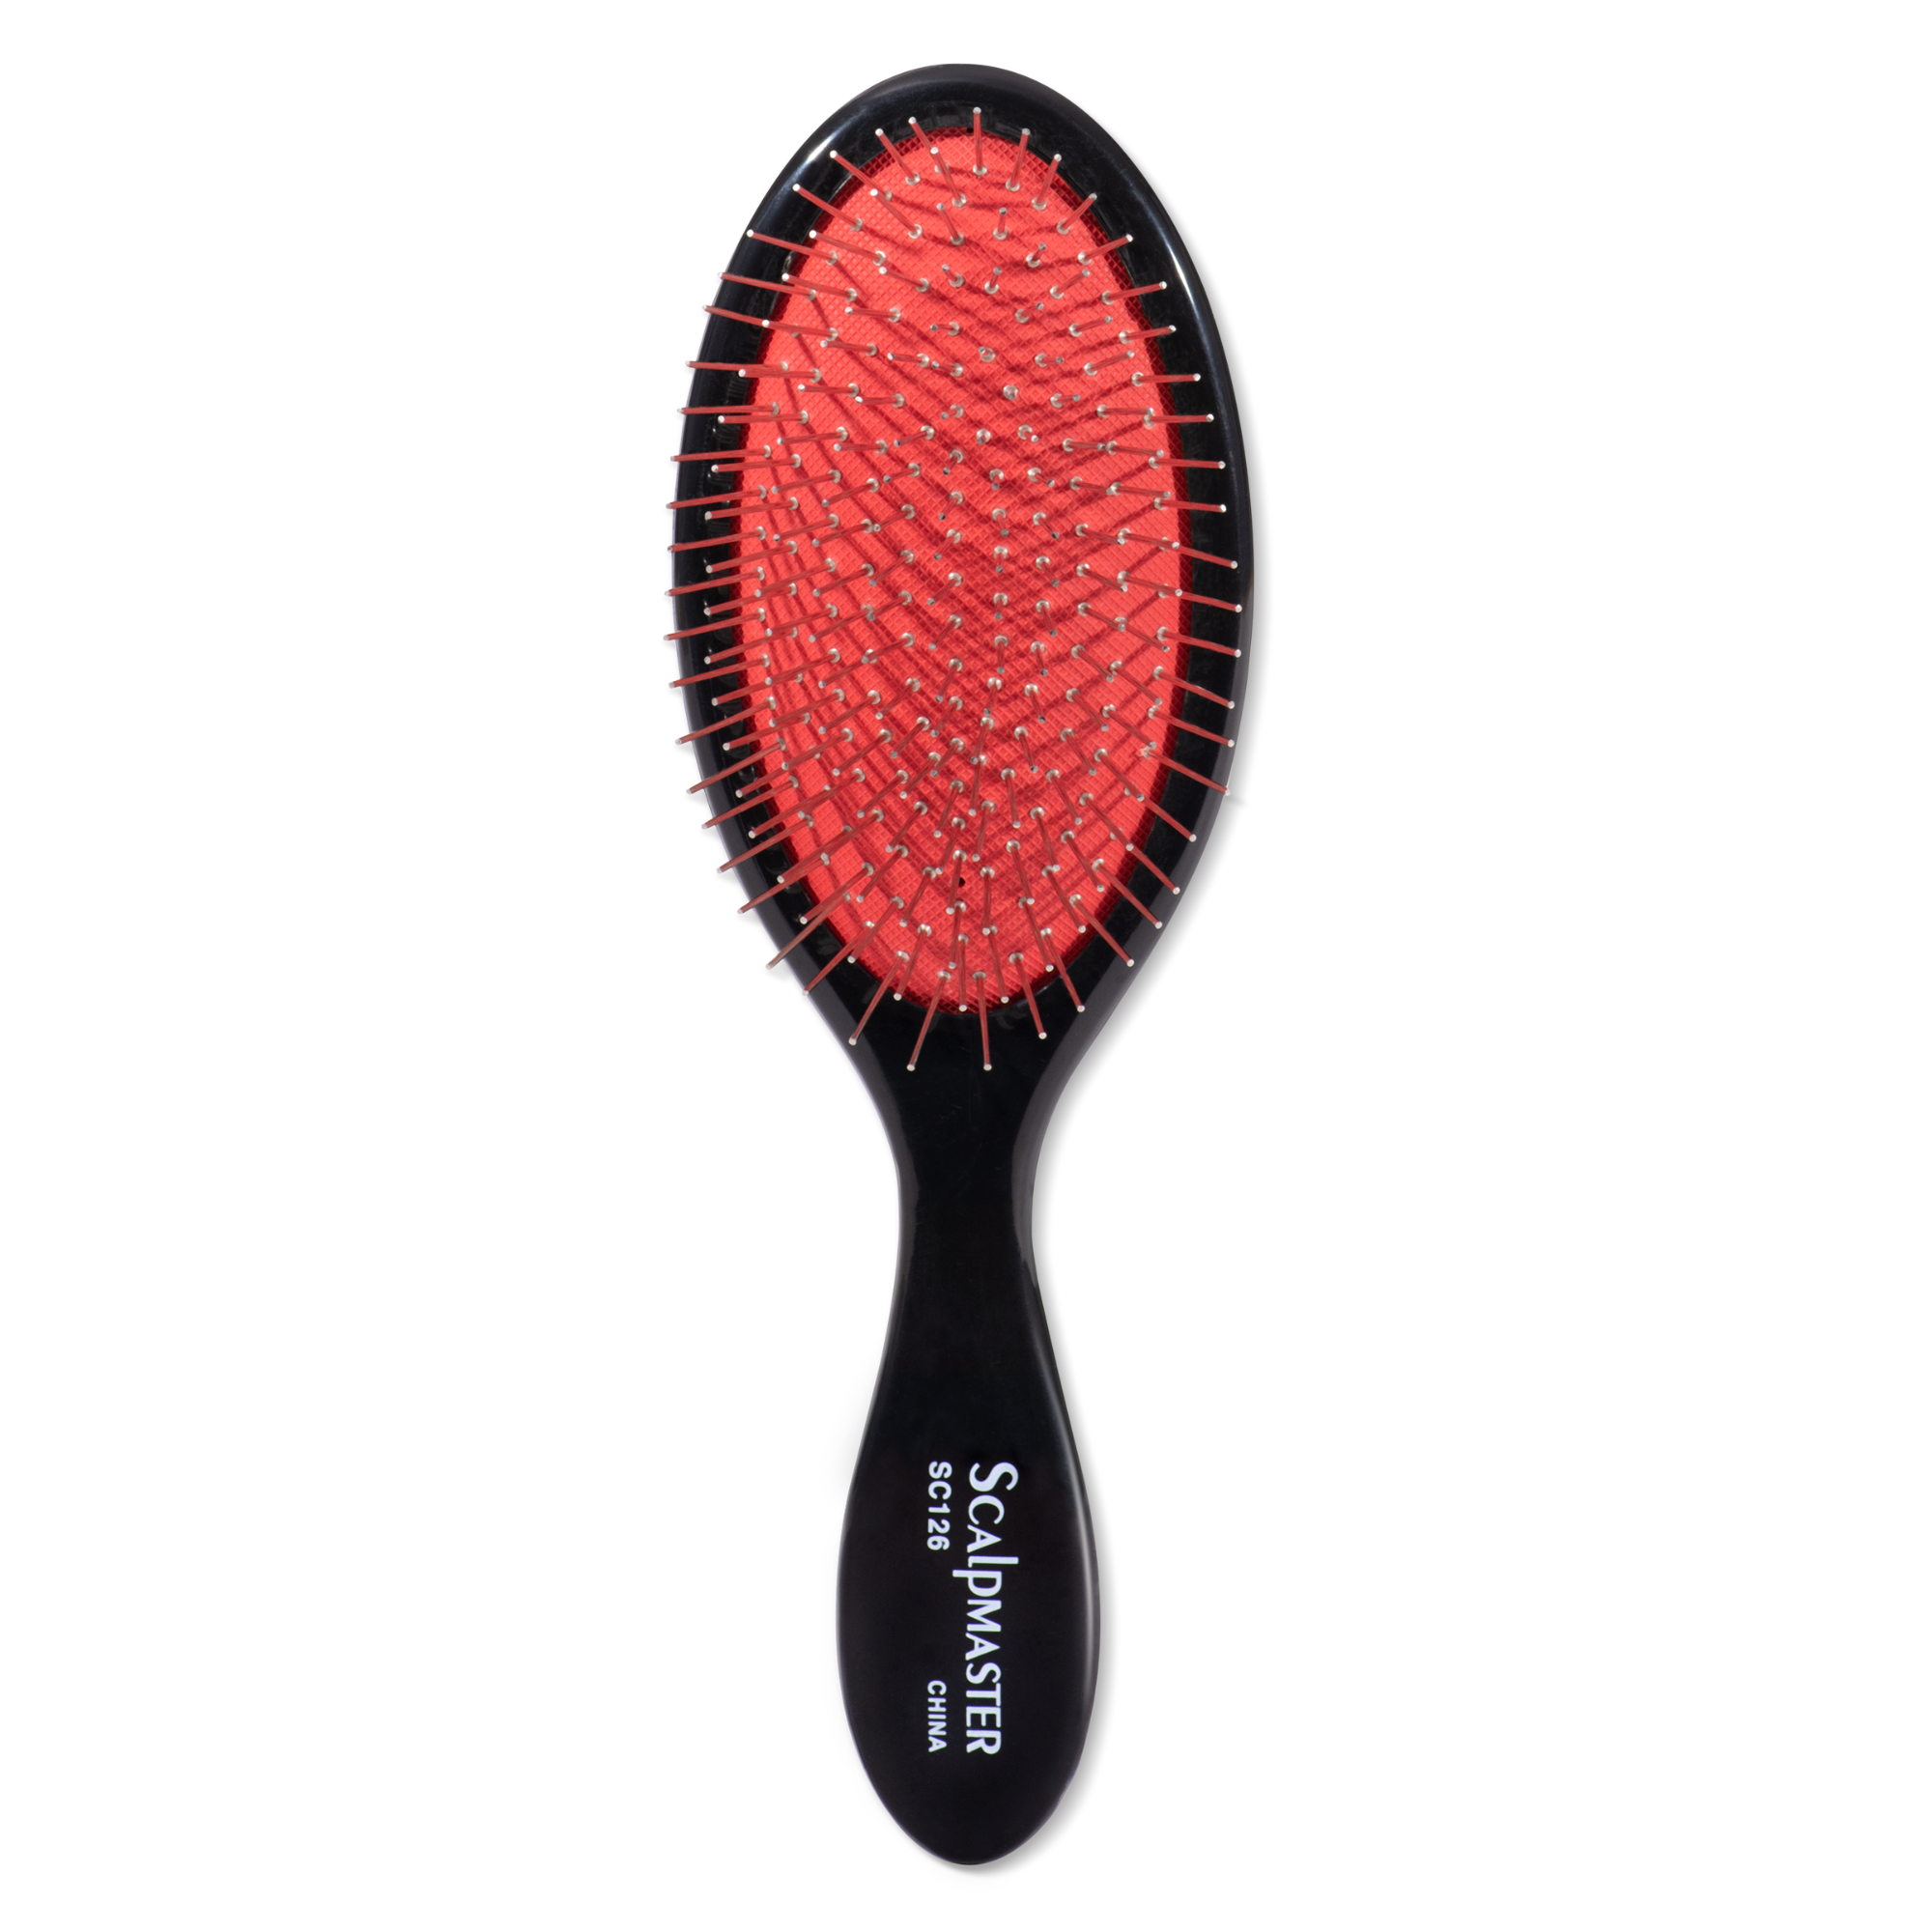 Cushion Brush with Wire Bristles, 11 Row